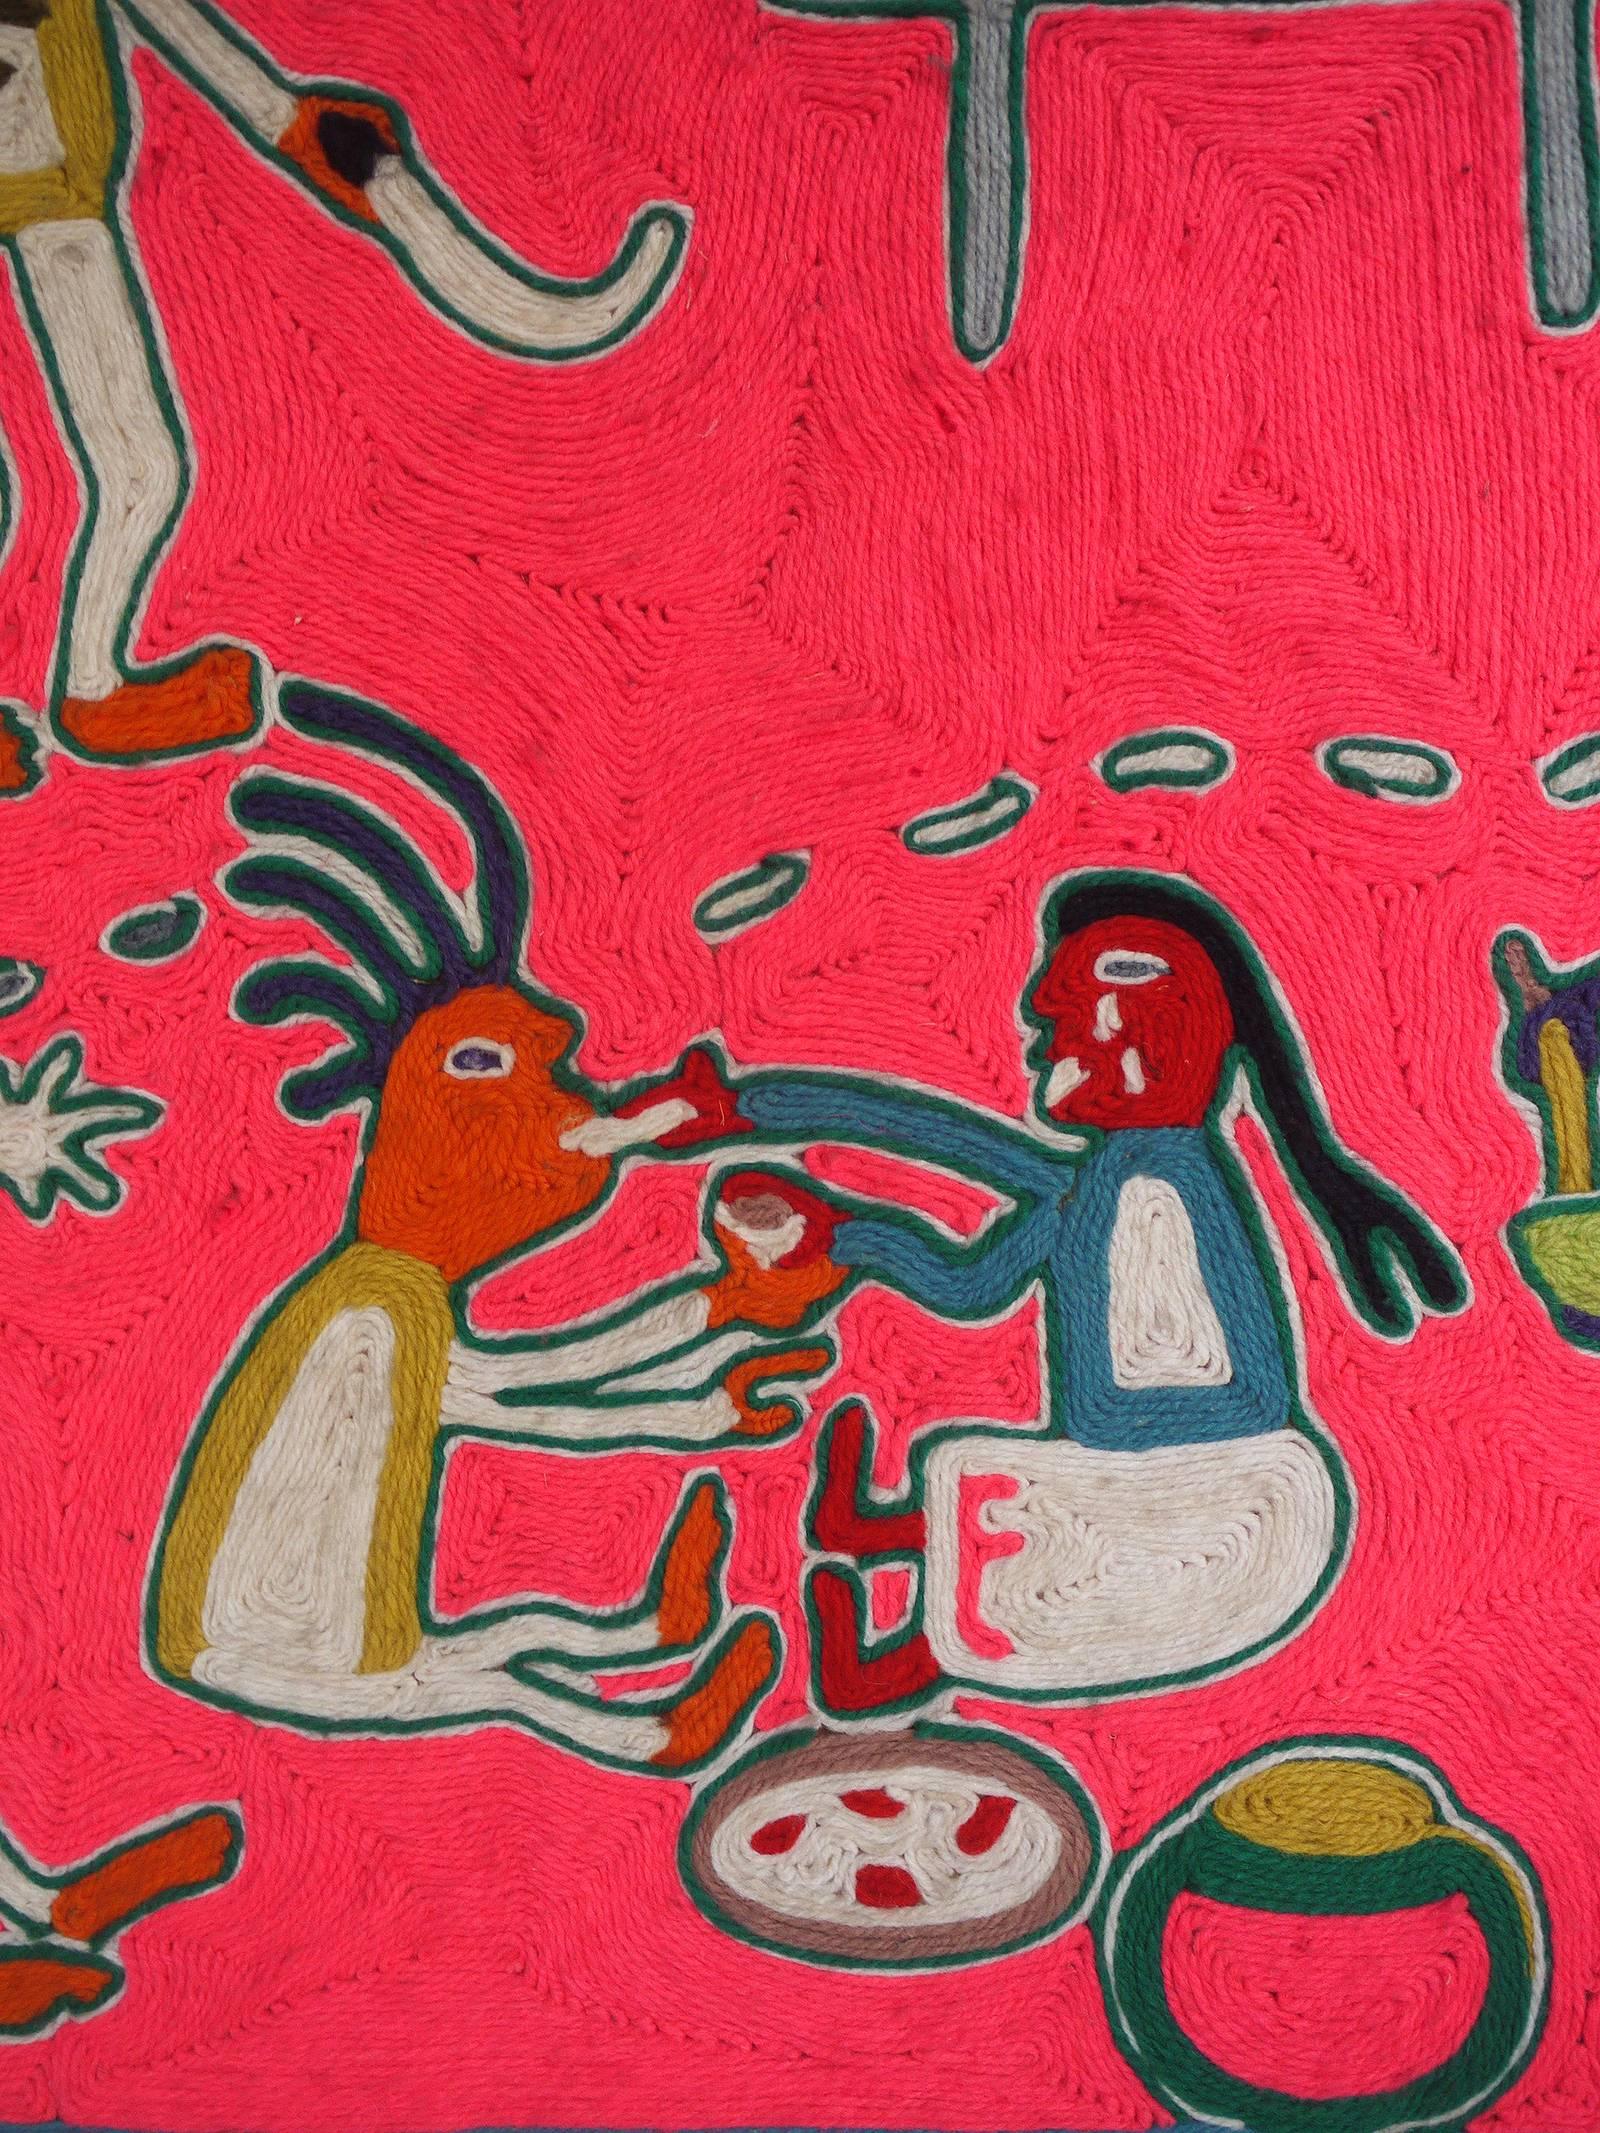 Vintage Mexican Nierika Yarn painting from the Huichol Indians.

Wedding,
Mexico, 1998.
The author is Emeteria Rios Martinez.
Bride and groom while preparing the meal. On the left the groom with machete and firewood. Down in the picture they